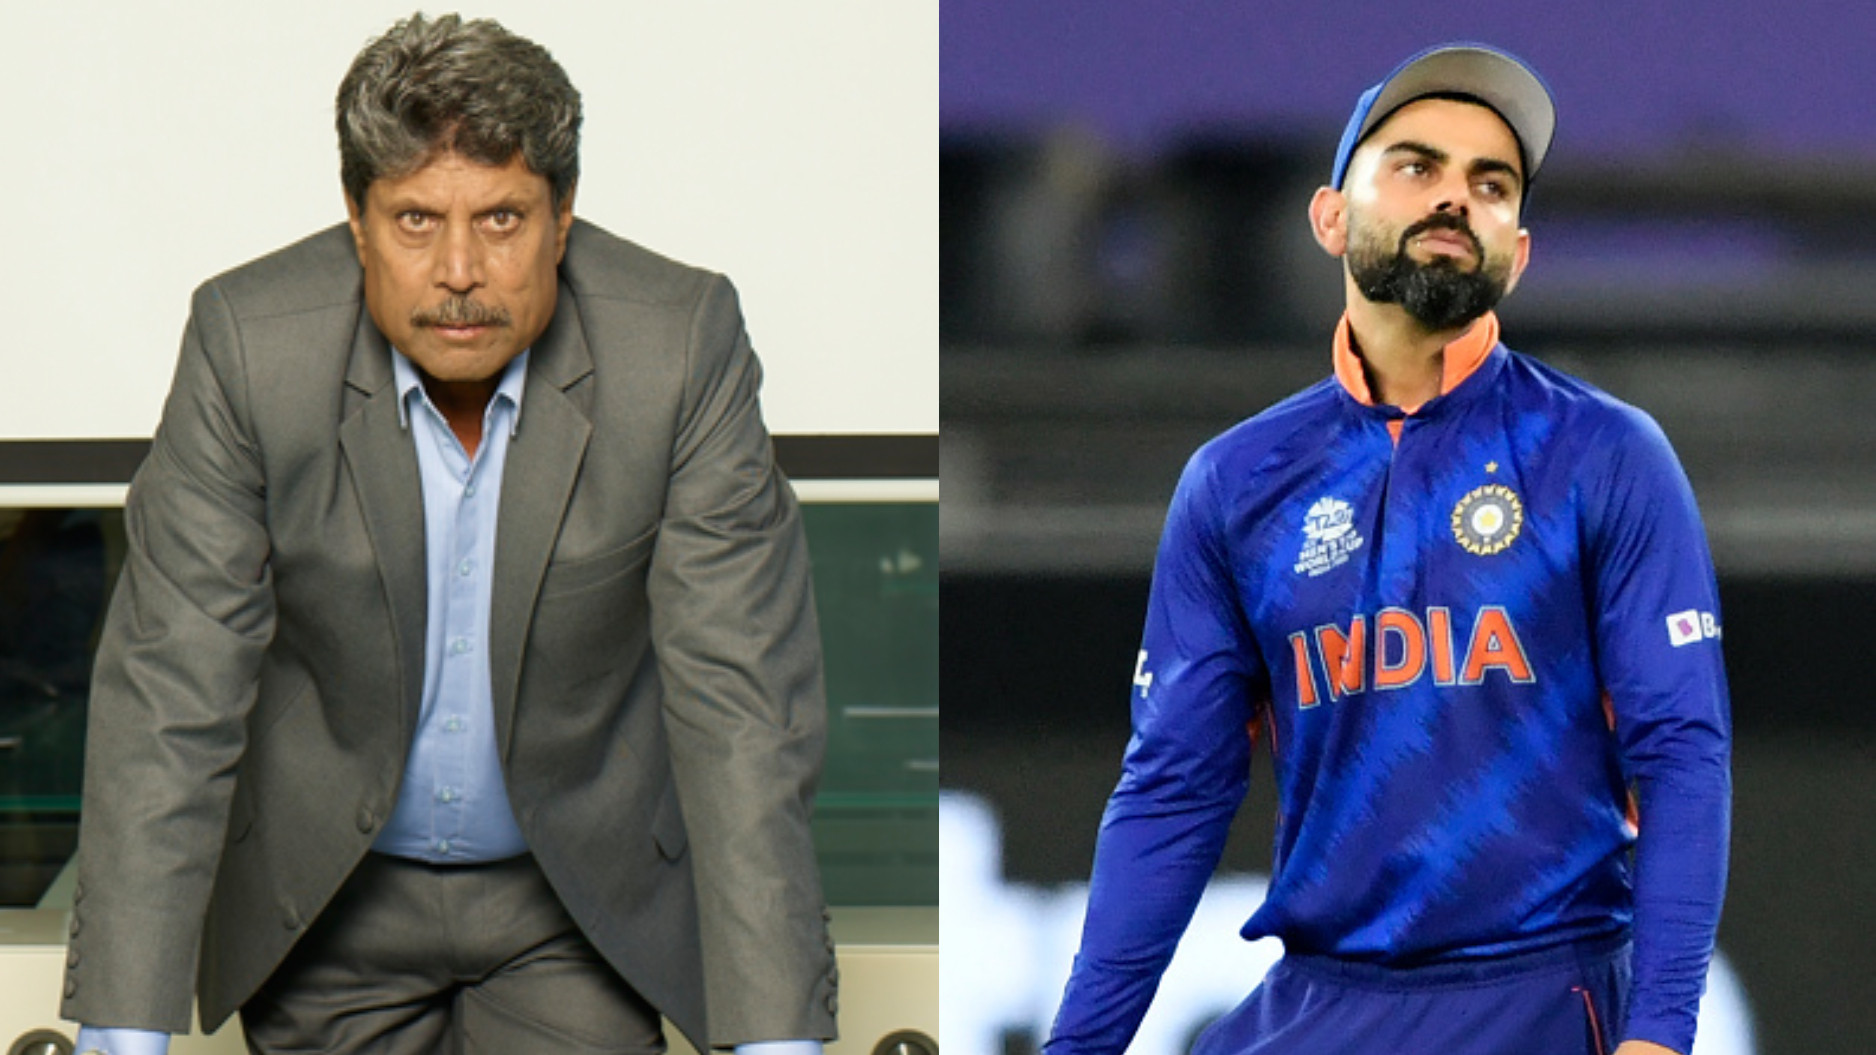 T20 World Cup 2021: For a big player, it’s a very weak statement- Kapil Dev on Kohli’s ‘not brave enough’ comment